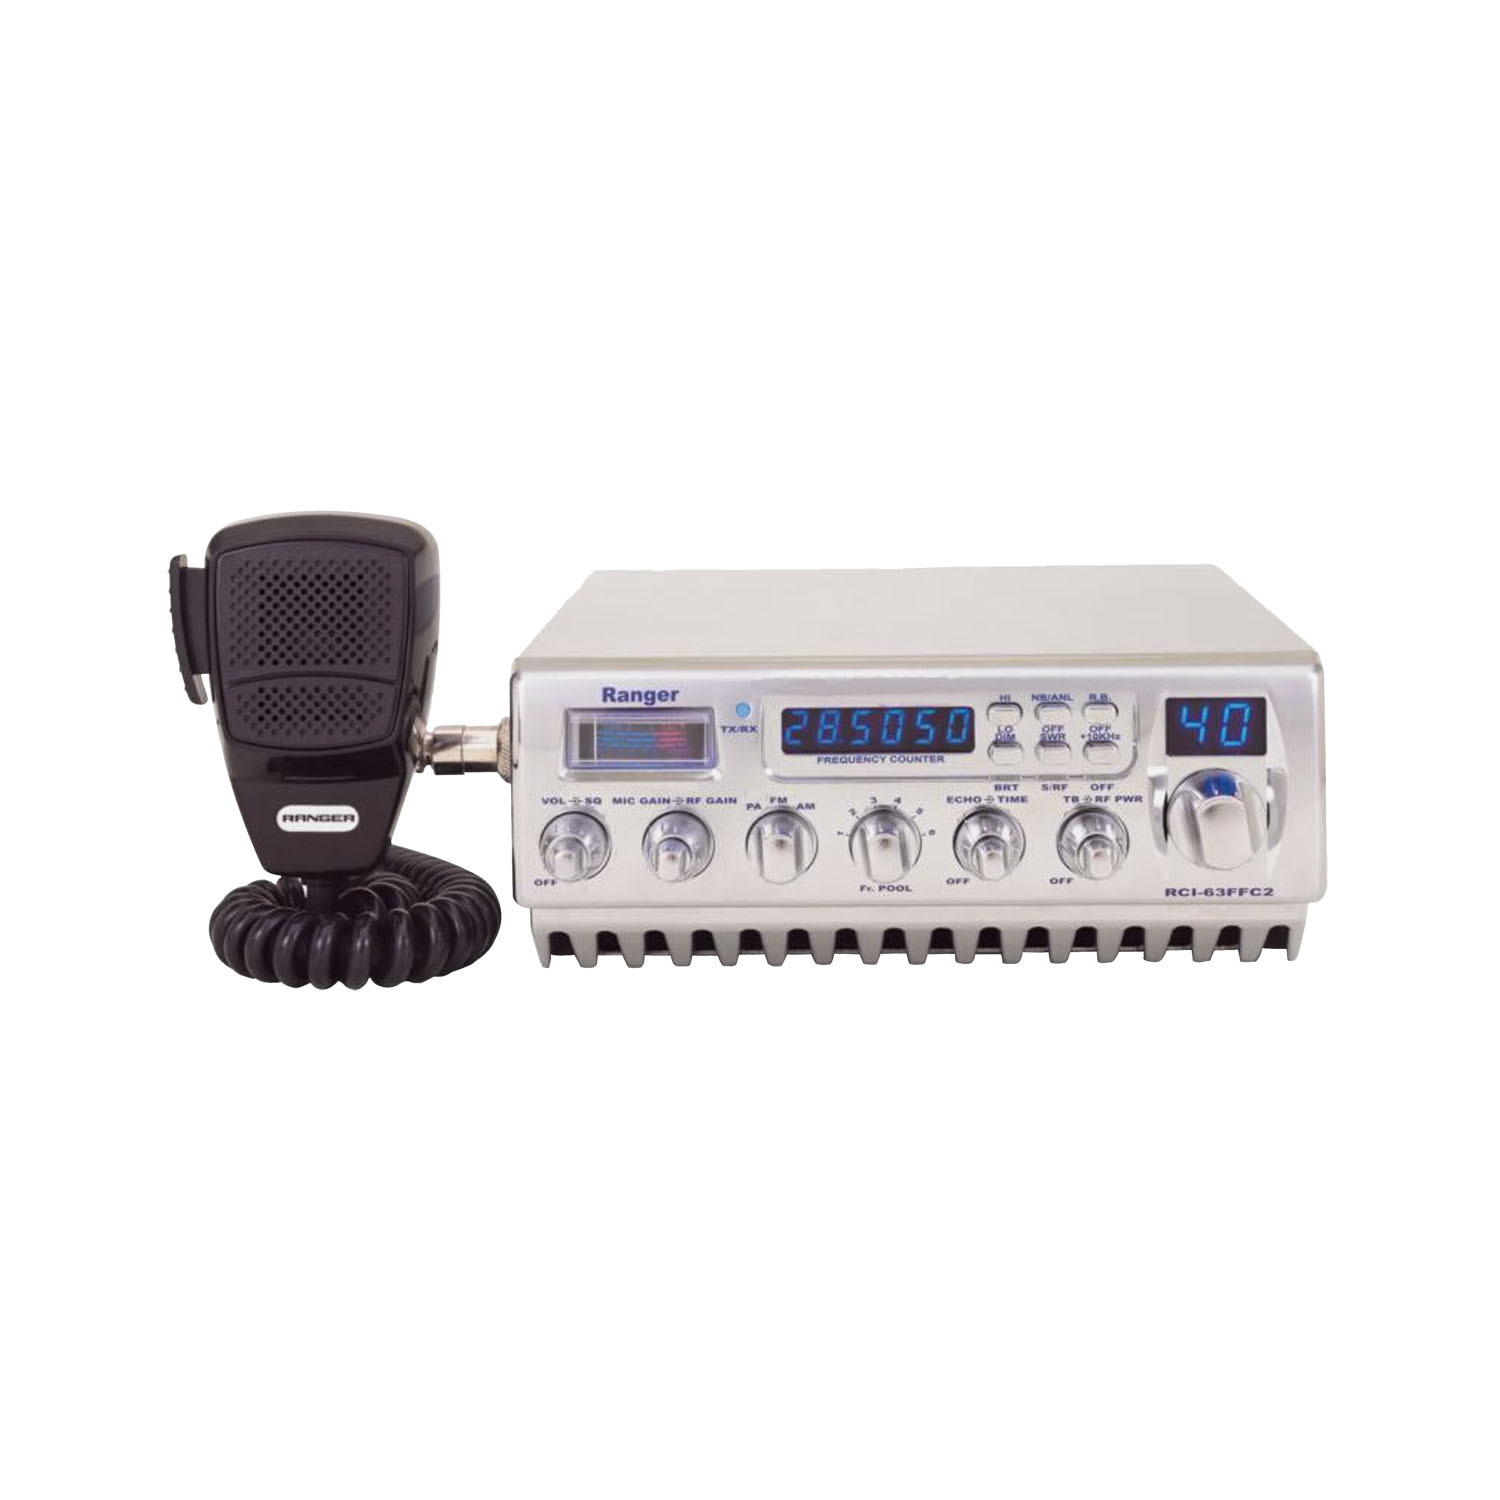 RCI - RCI63FFC2 200 WATT 10 METER AM/FM MOBILE TRANSCEIVER WITH FREQUENCY COUNTER, ECHO/TALK-BACK & ROGER BEEP